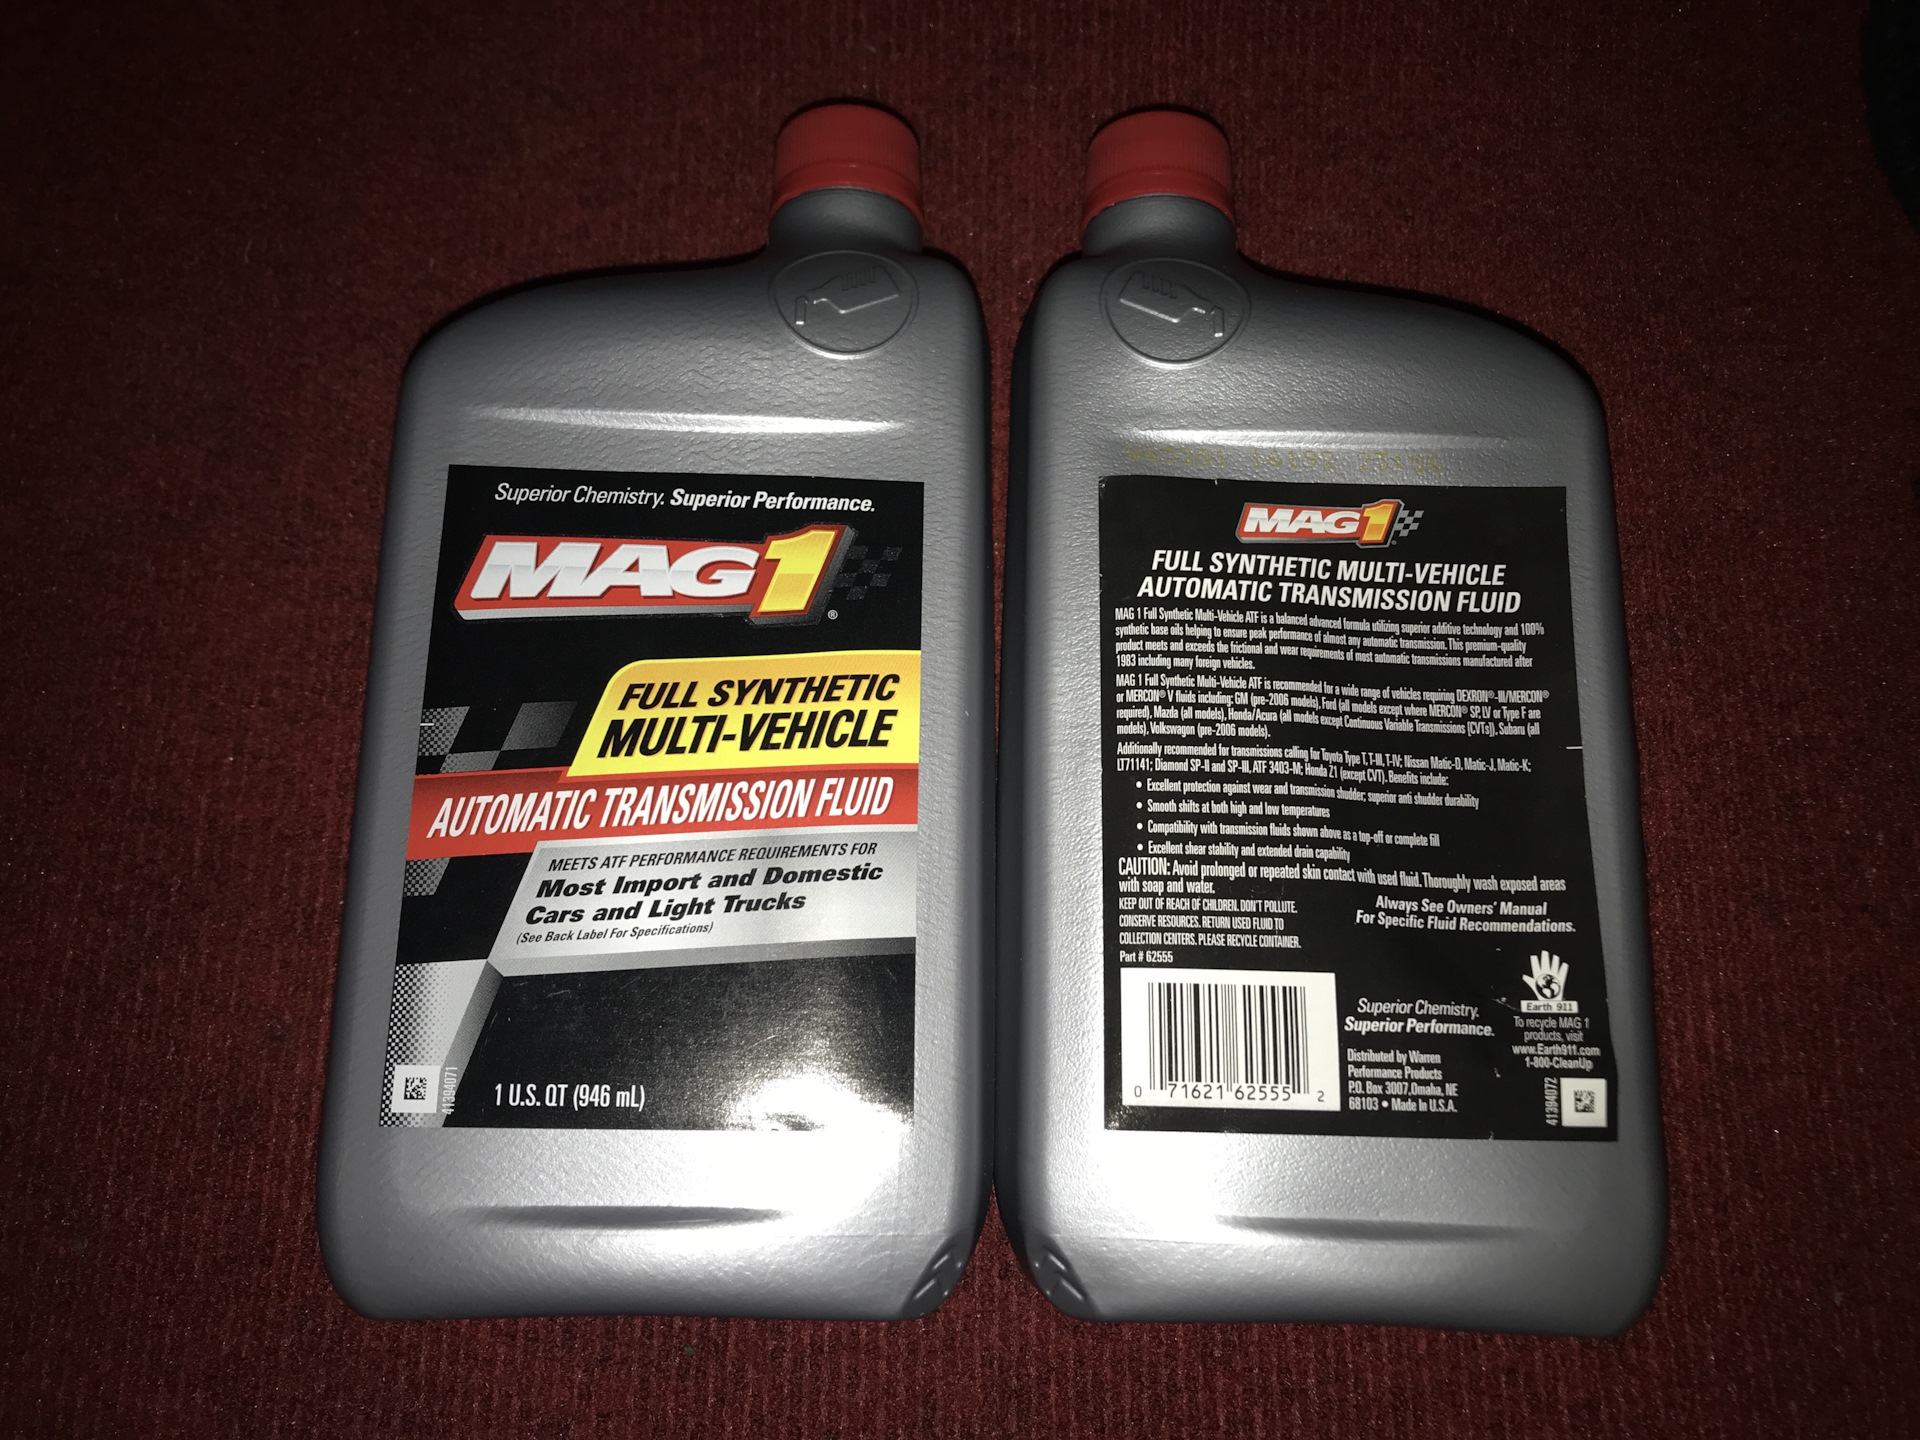 Масло акпп омск. Mag 1 ATF. Mag1 ATF AW-1. Mag 1 ATF Dexron 3. Mag1 Premium Power Steering Fluid.